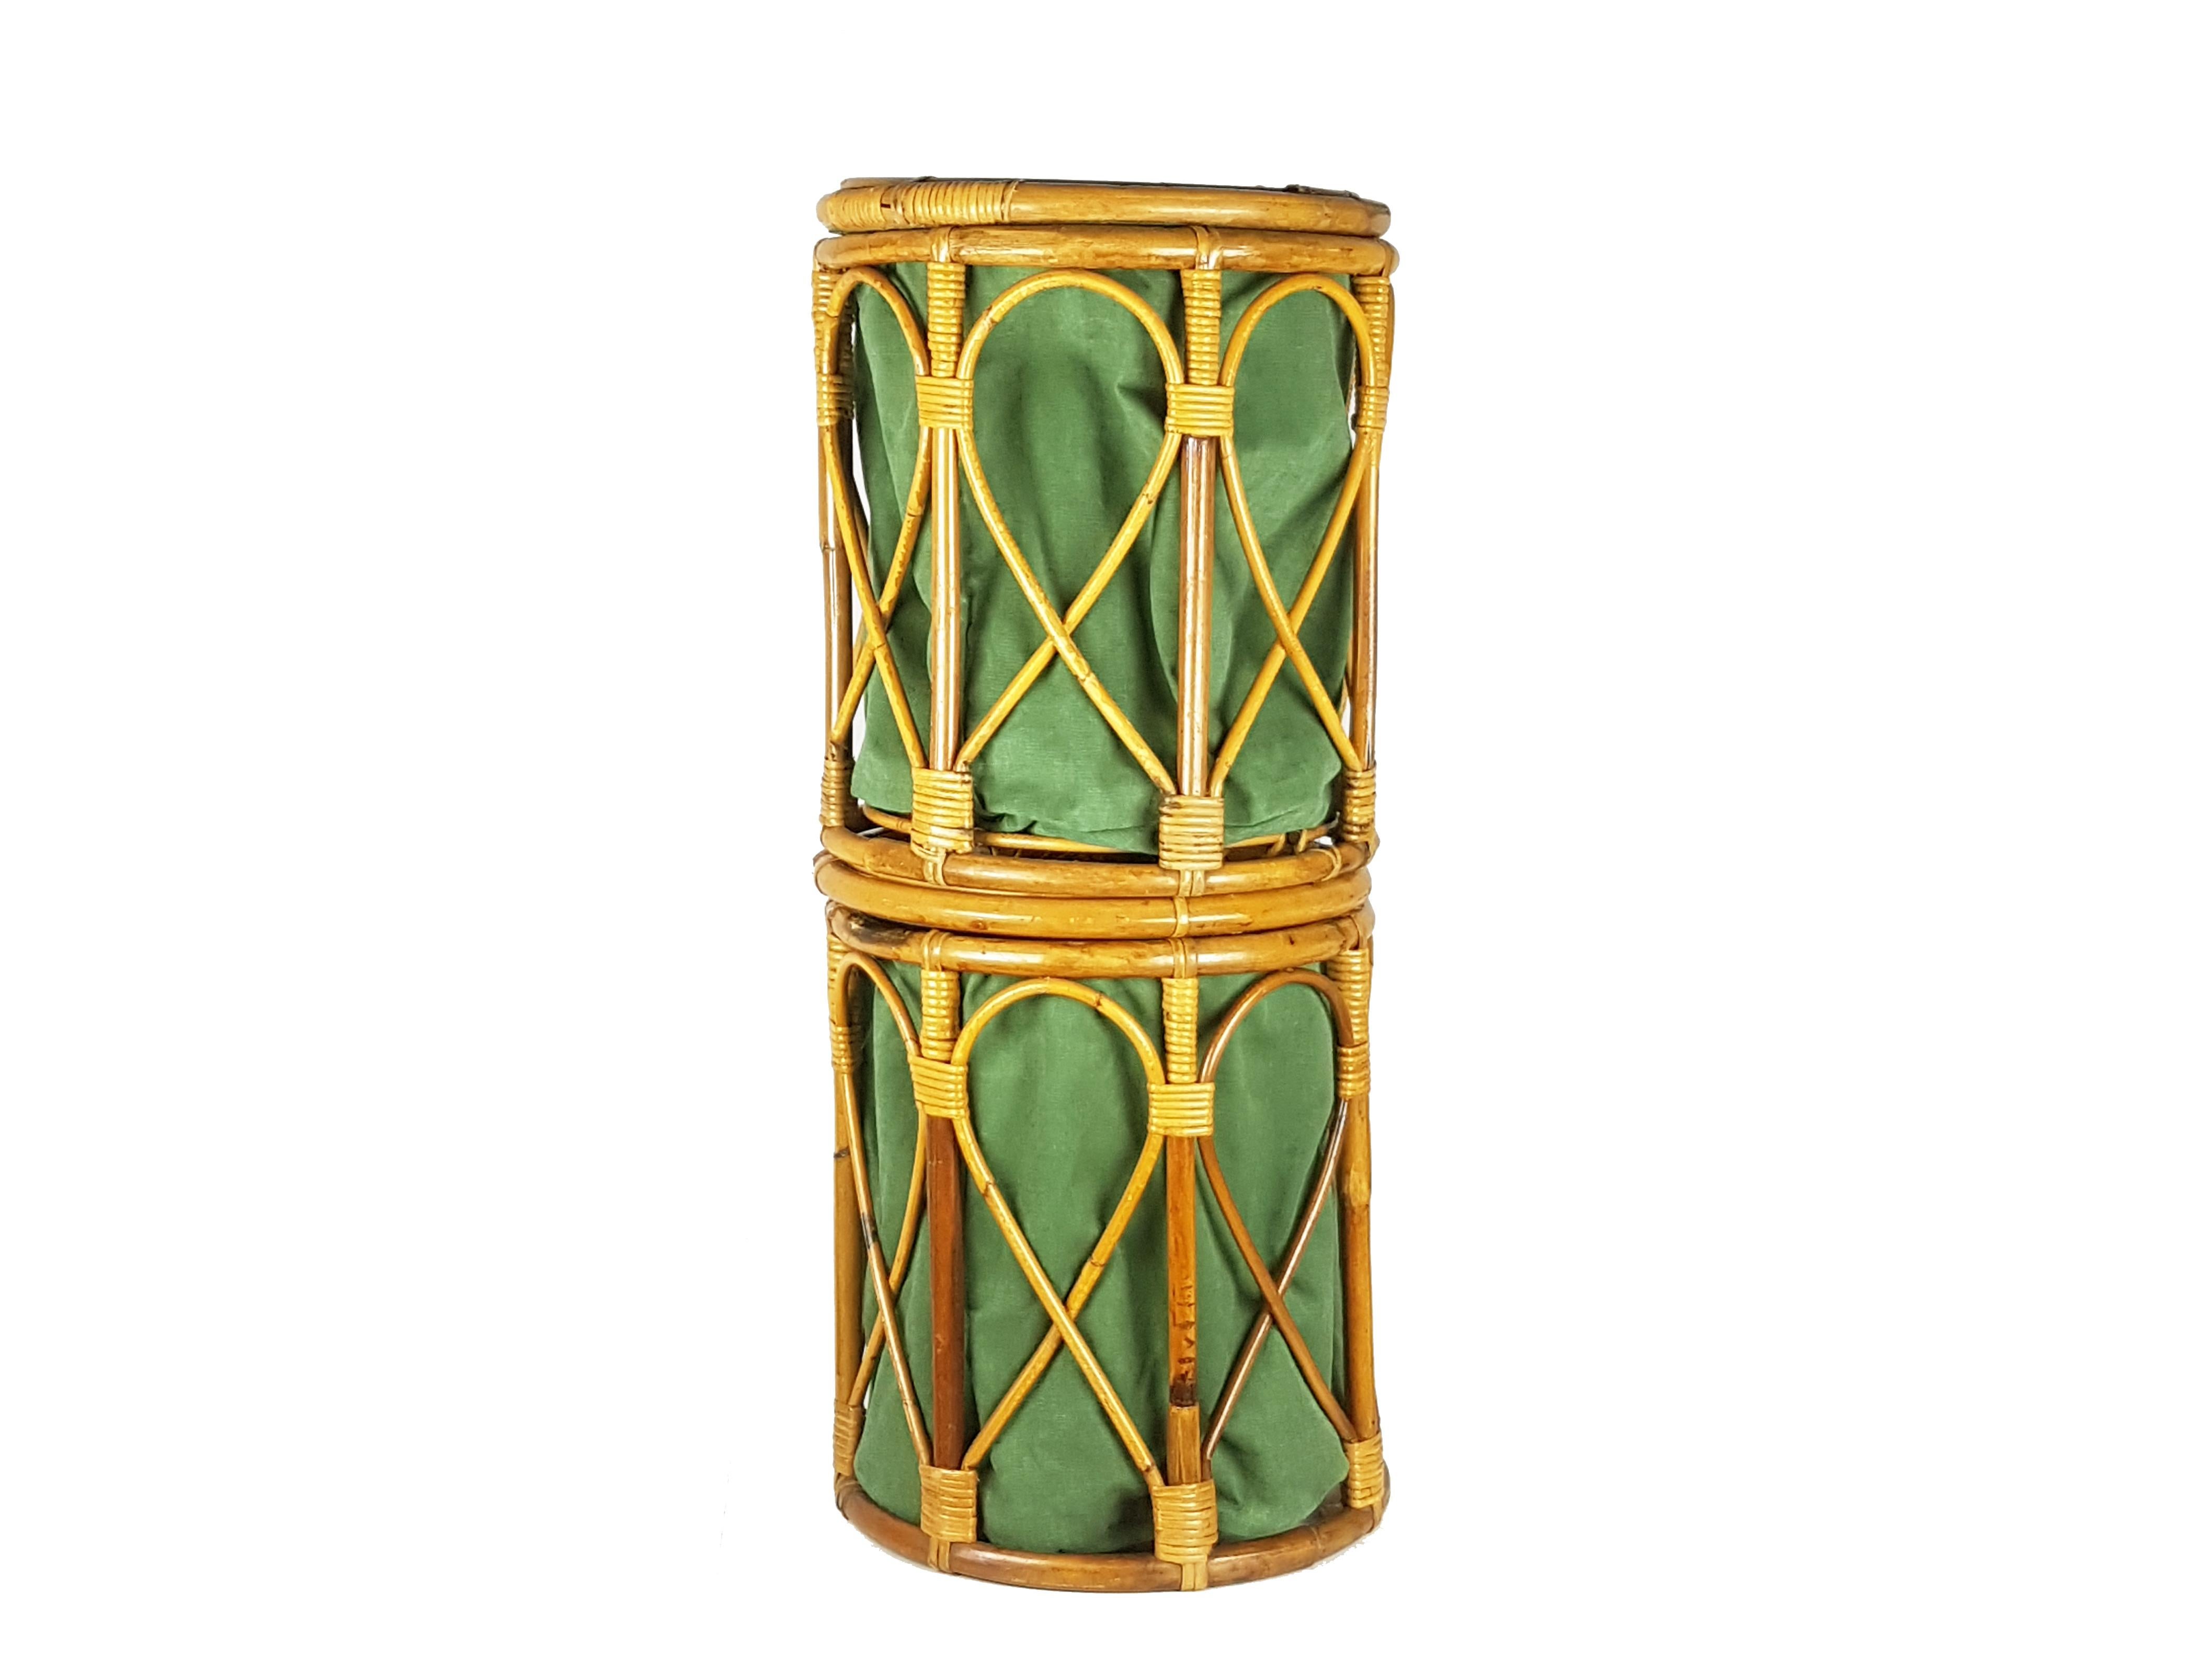 These vintage stools/baskets are made from a cylindrical rattan structure with a green fabric bag. They can be used as stools, a magazine racks or as a generic containers. Good vintage condition: wear consistent with age and use. Minor rattan losses